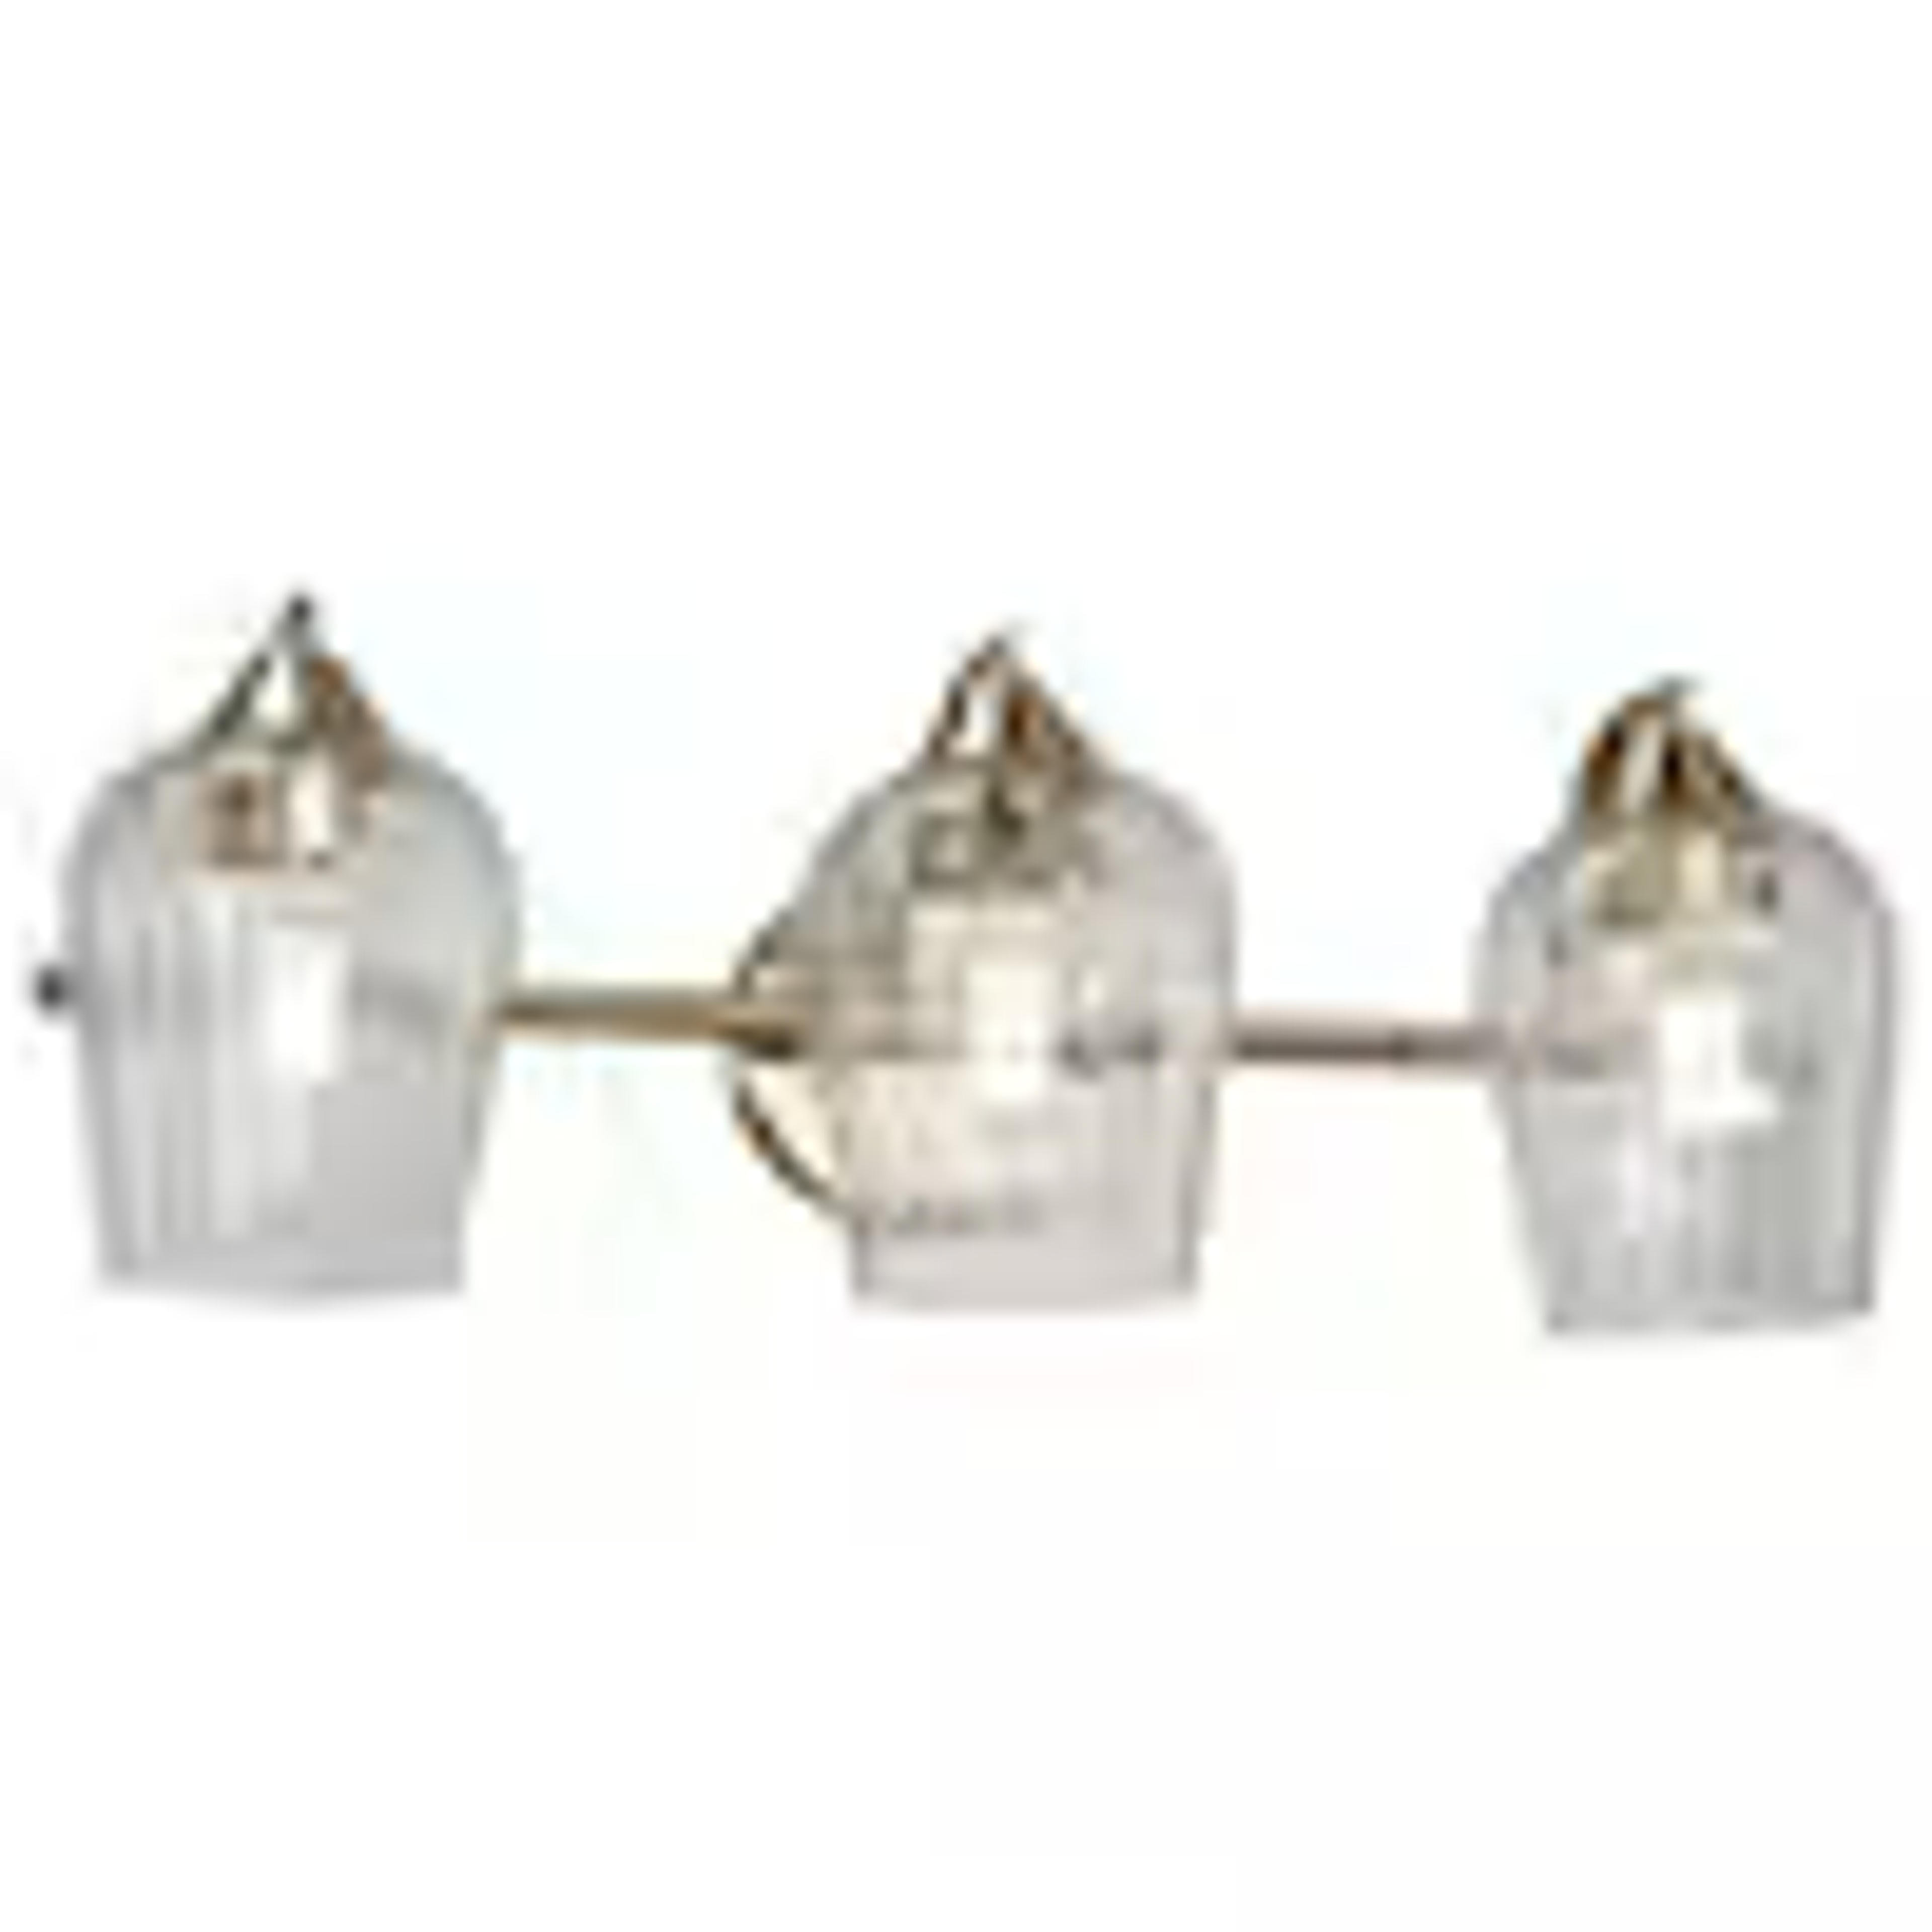 allen + roth Rumie 22.05-in 3-Light Brushed Gold Modern/Contemporary Vanity Light Lowes.com